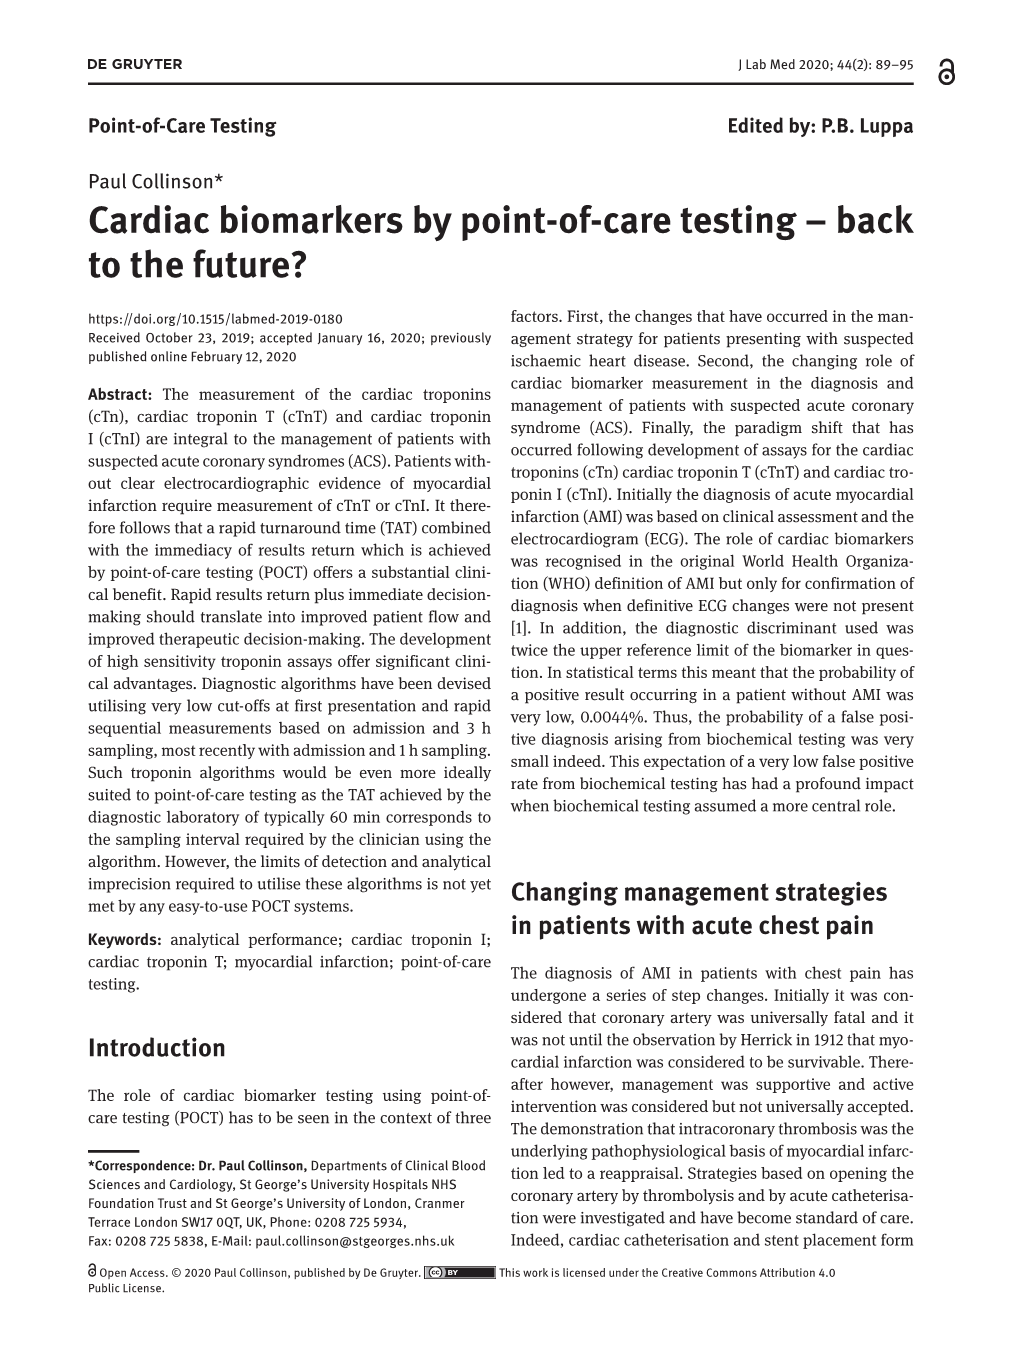 Cardiac Biomarkers by Point-Of-Care Testing – Back to the Future? Factors